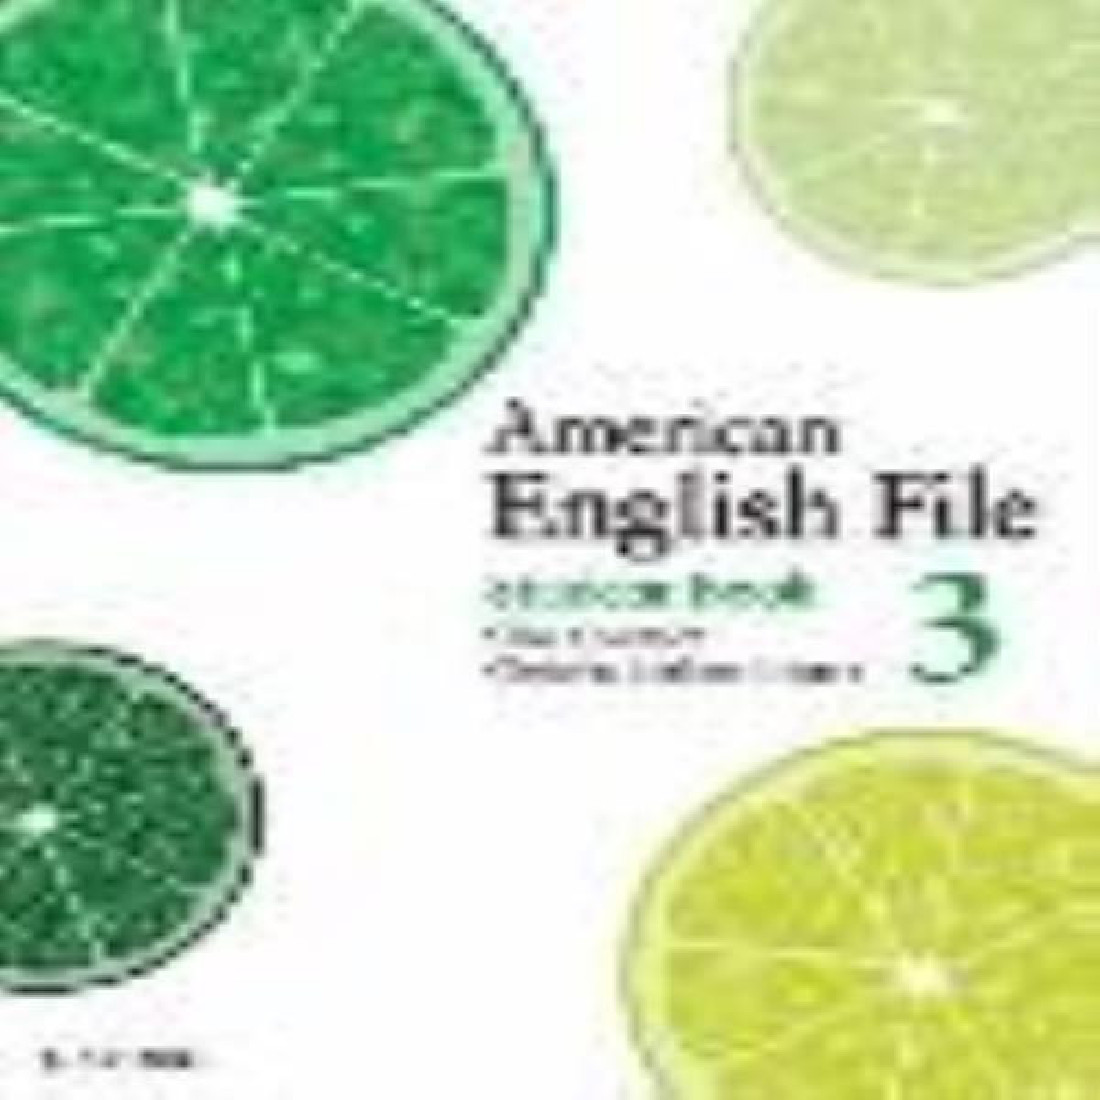 AMERICAN ENGLISH FILE 3 STUDENTS BOOK